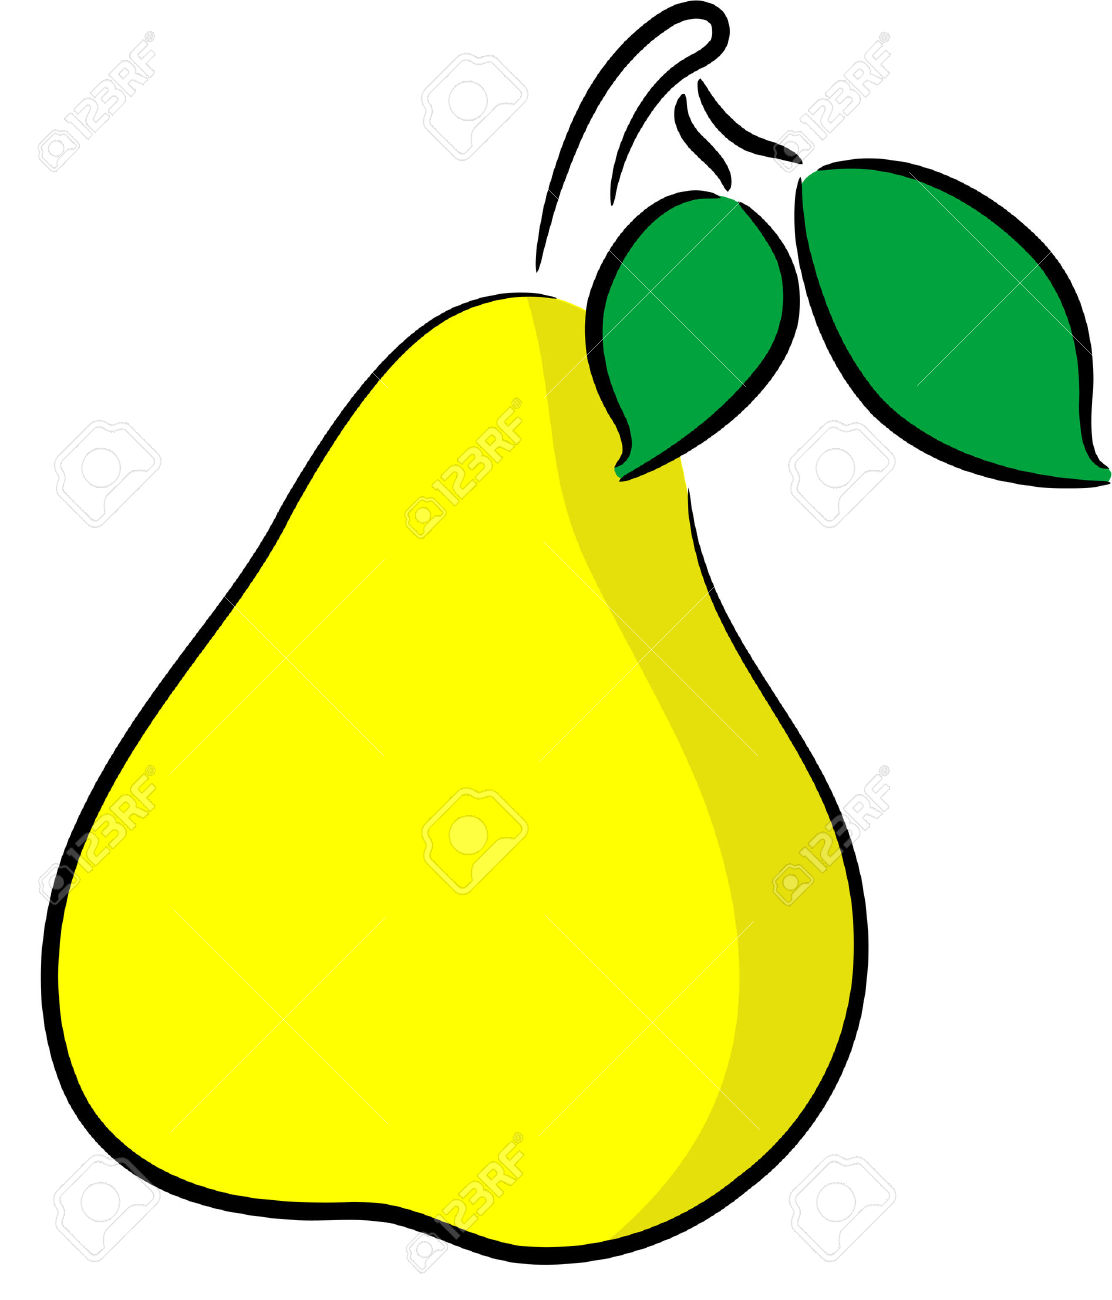 Pear Outline